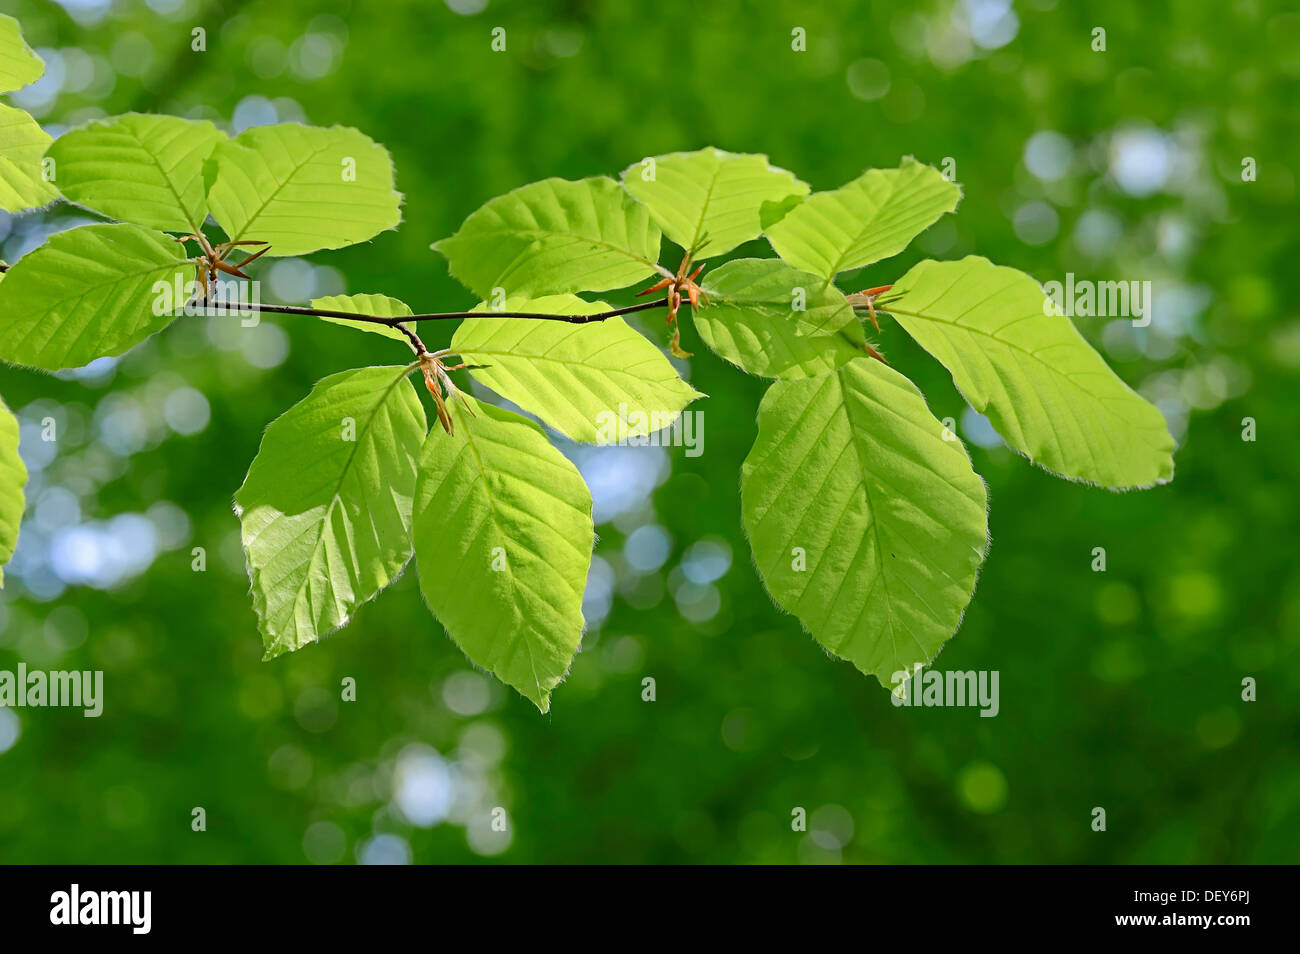 European Beech or Common Beech (Fagus sylvatica) leaves in spring, North Rhine-Westphalia, Germany Stock Photo